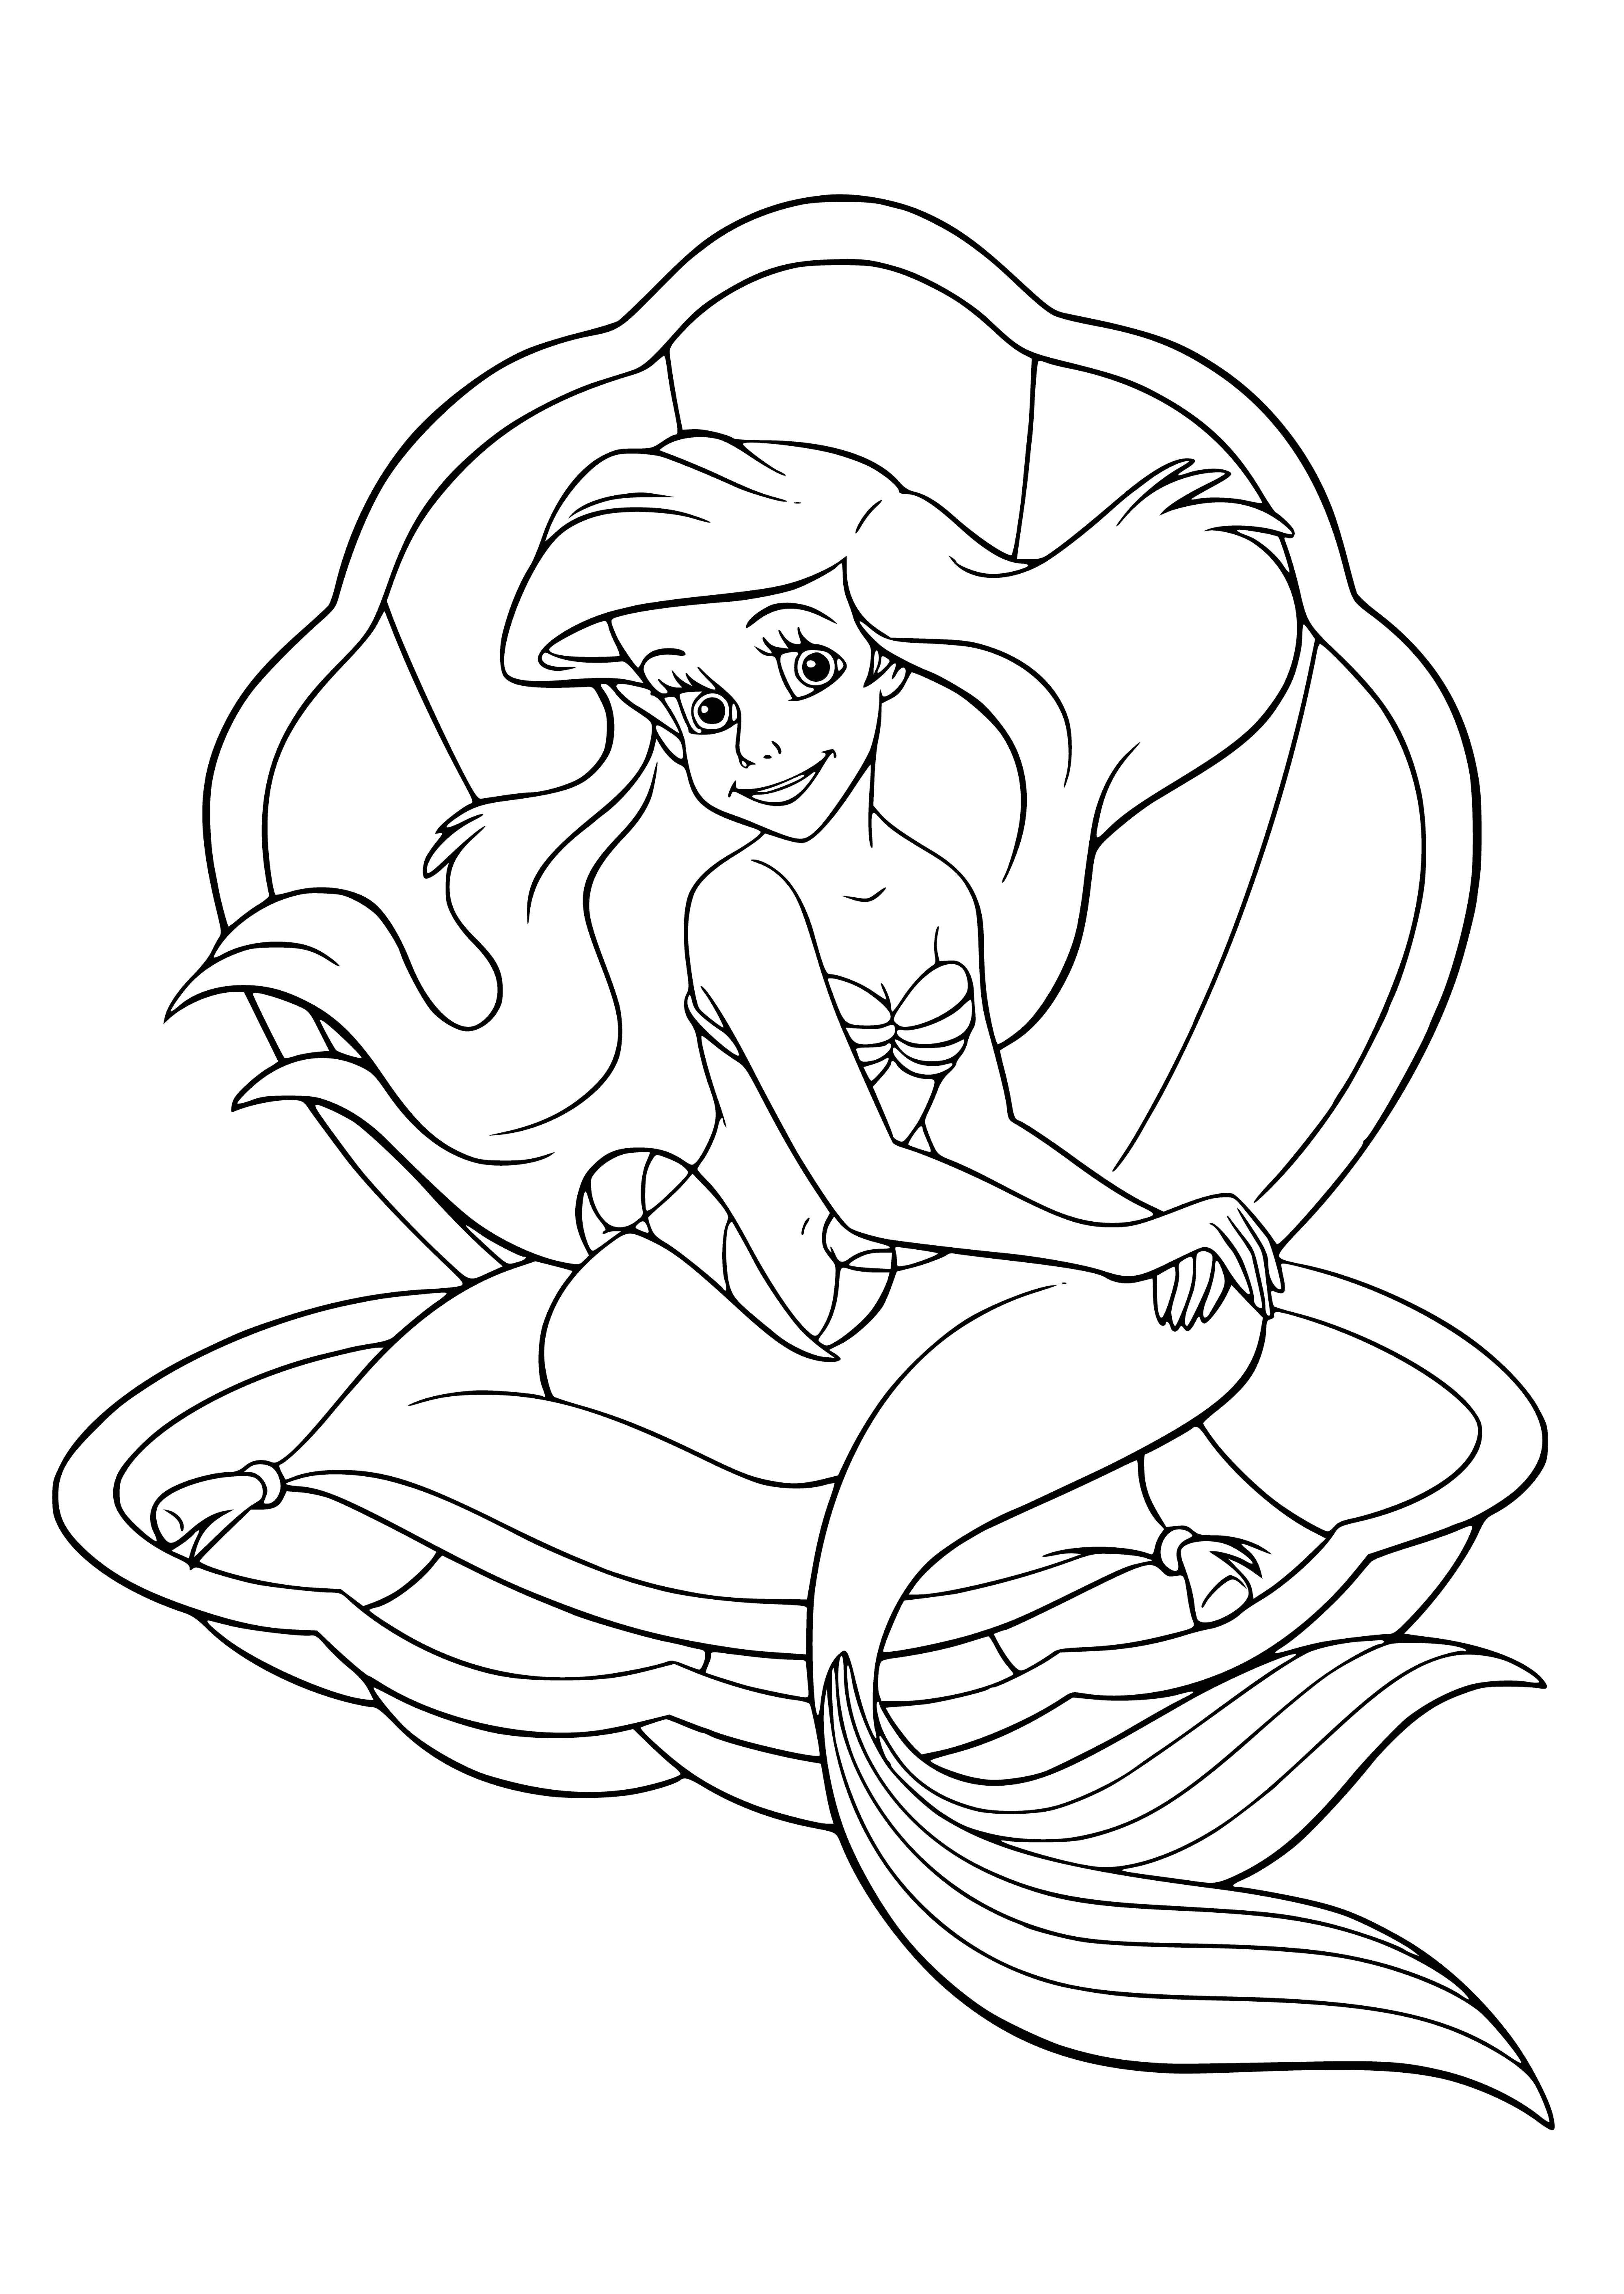 The little mermaid in the sink coloring page